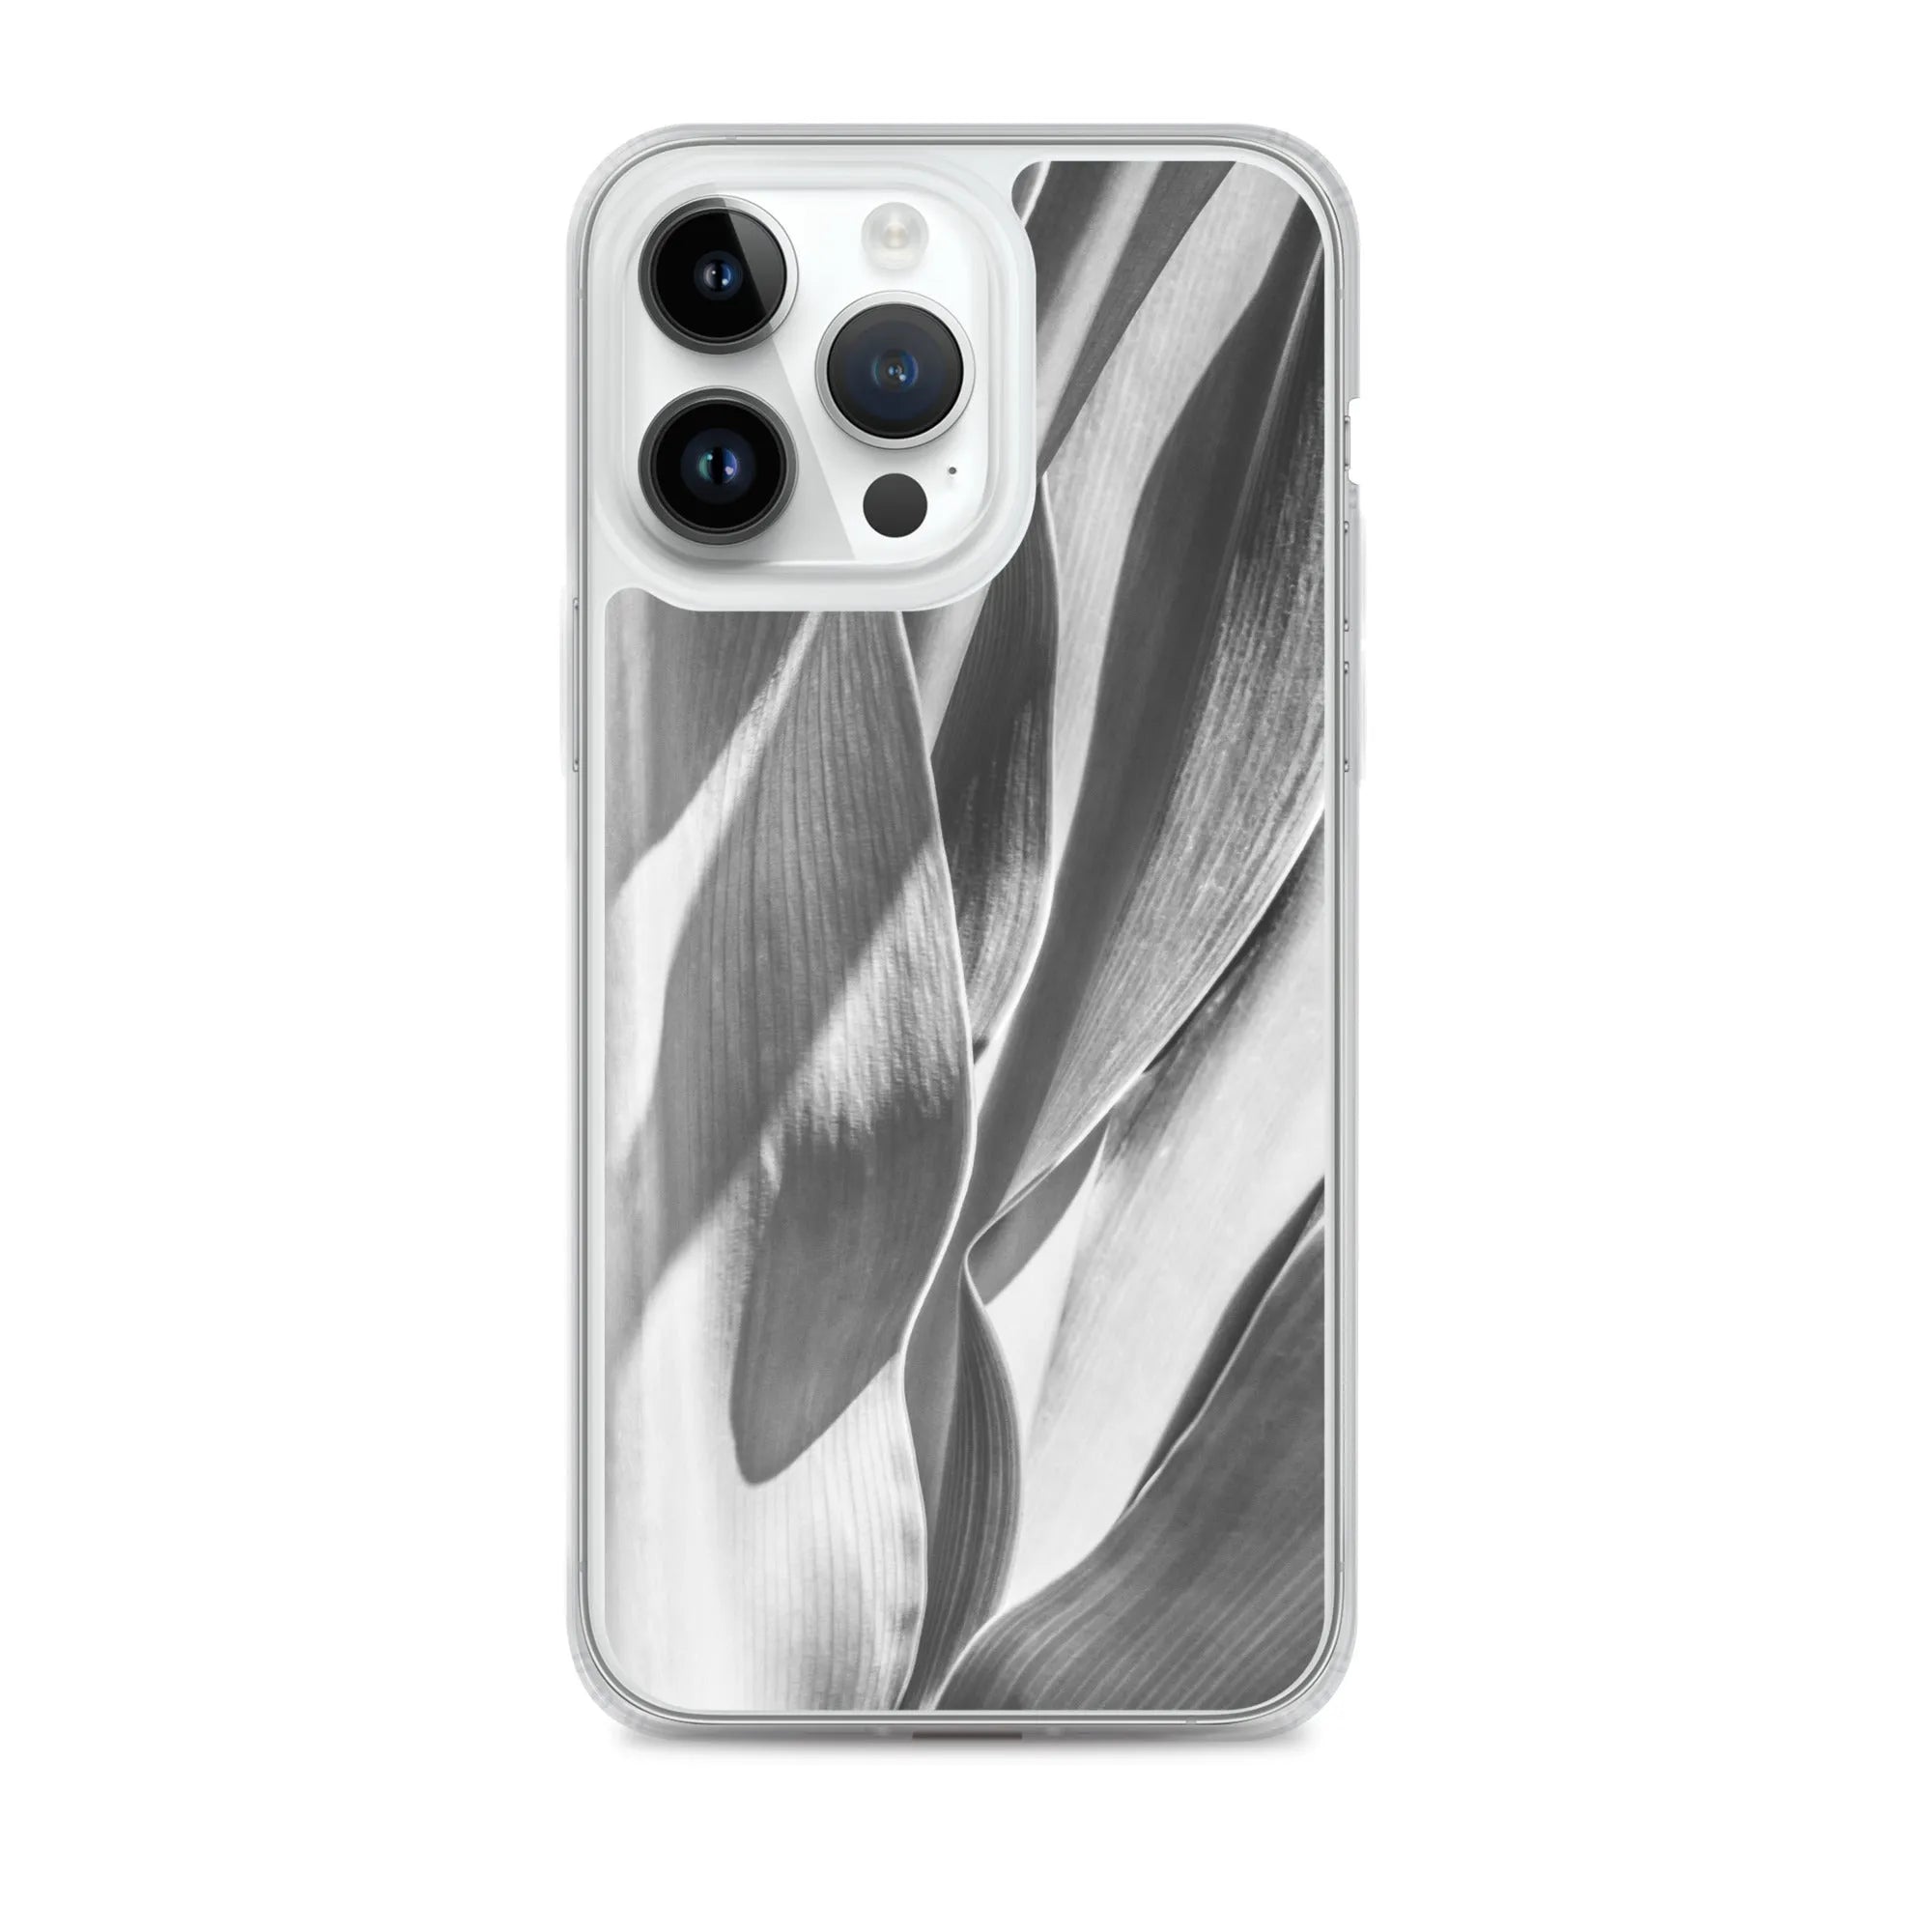 Into The Wild Botanical Art Iphone Case - Black And White - Iphone 14 Pro Max - Mobile Phone Cases - Aesthetic Art